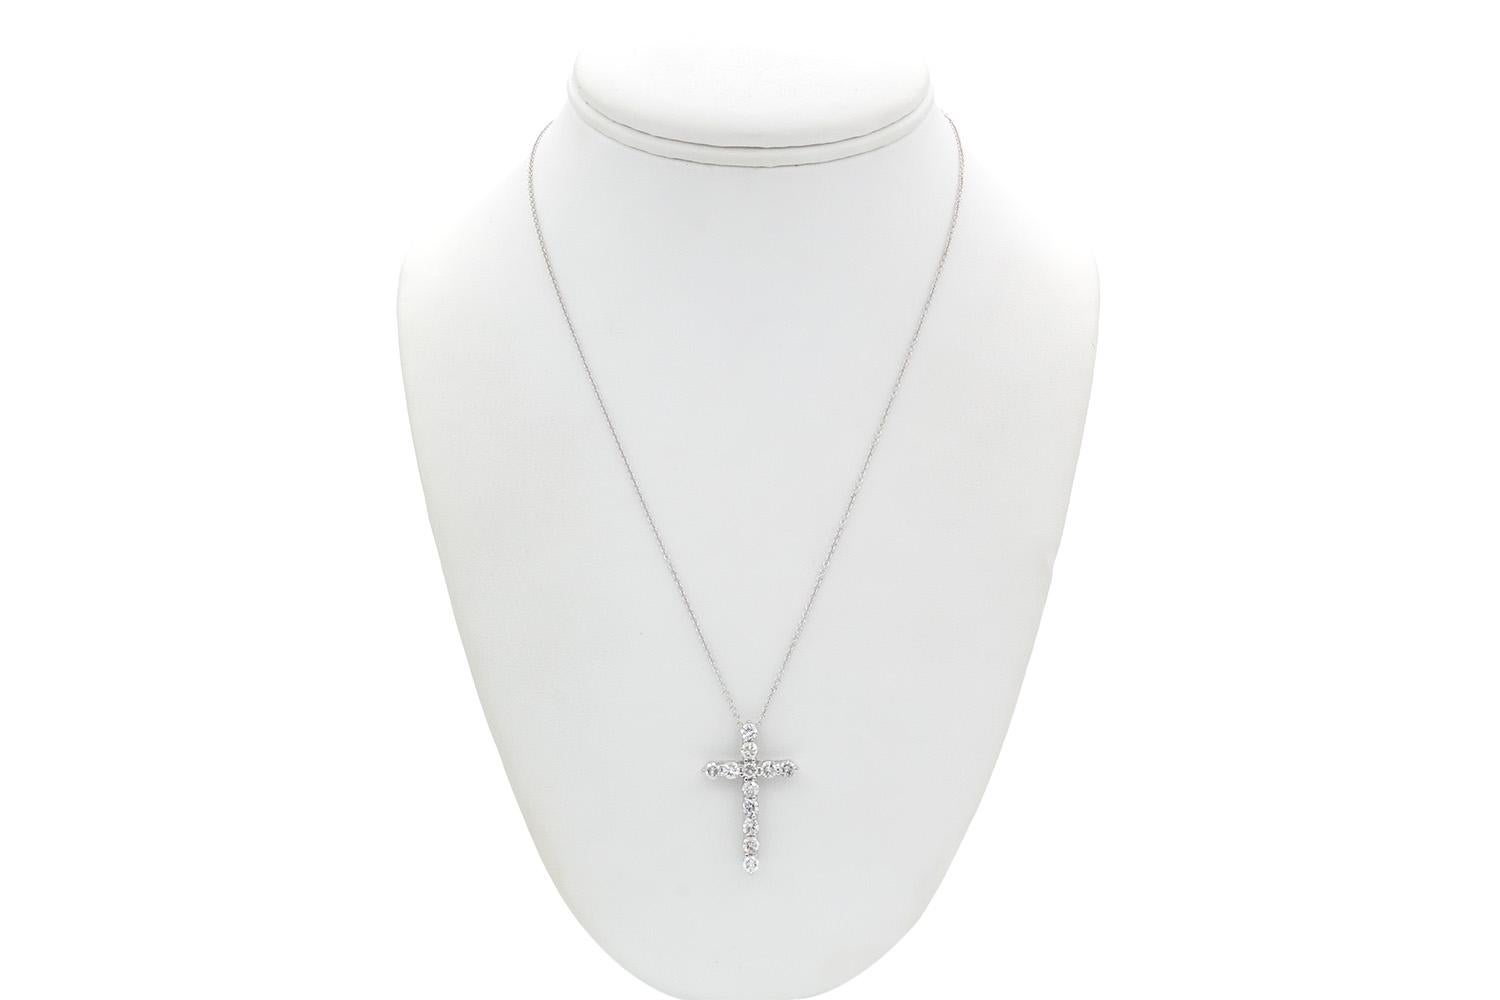 We are pleased to present this 14k White Gold & Diamond Cross Crucifix Pendant Necklace. This stunning piece features 1.80ctw H-I/SI2-I1 round brilliant cut diamonds set in a 14k white gold cross pendant on a 14k white gold chain which is adjustable